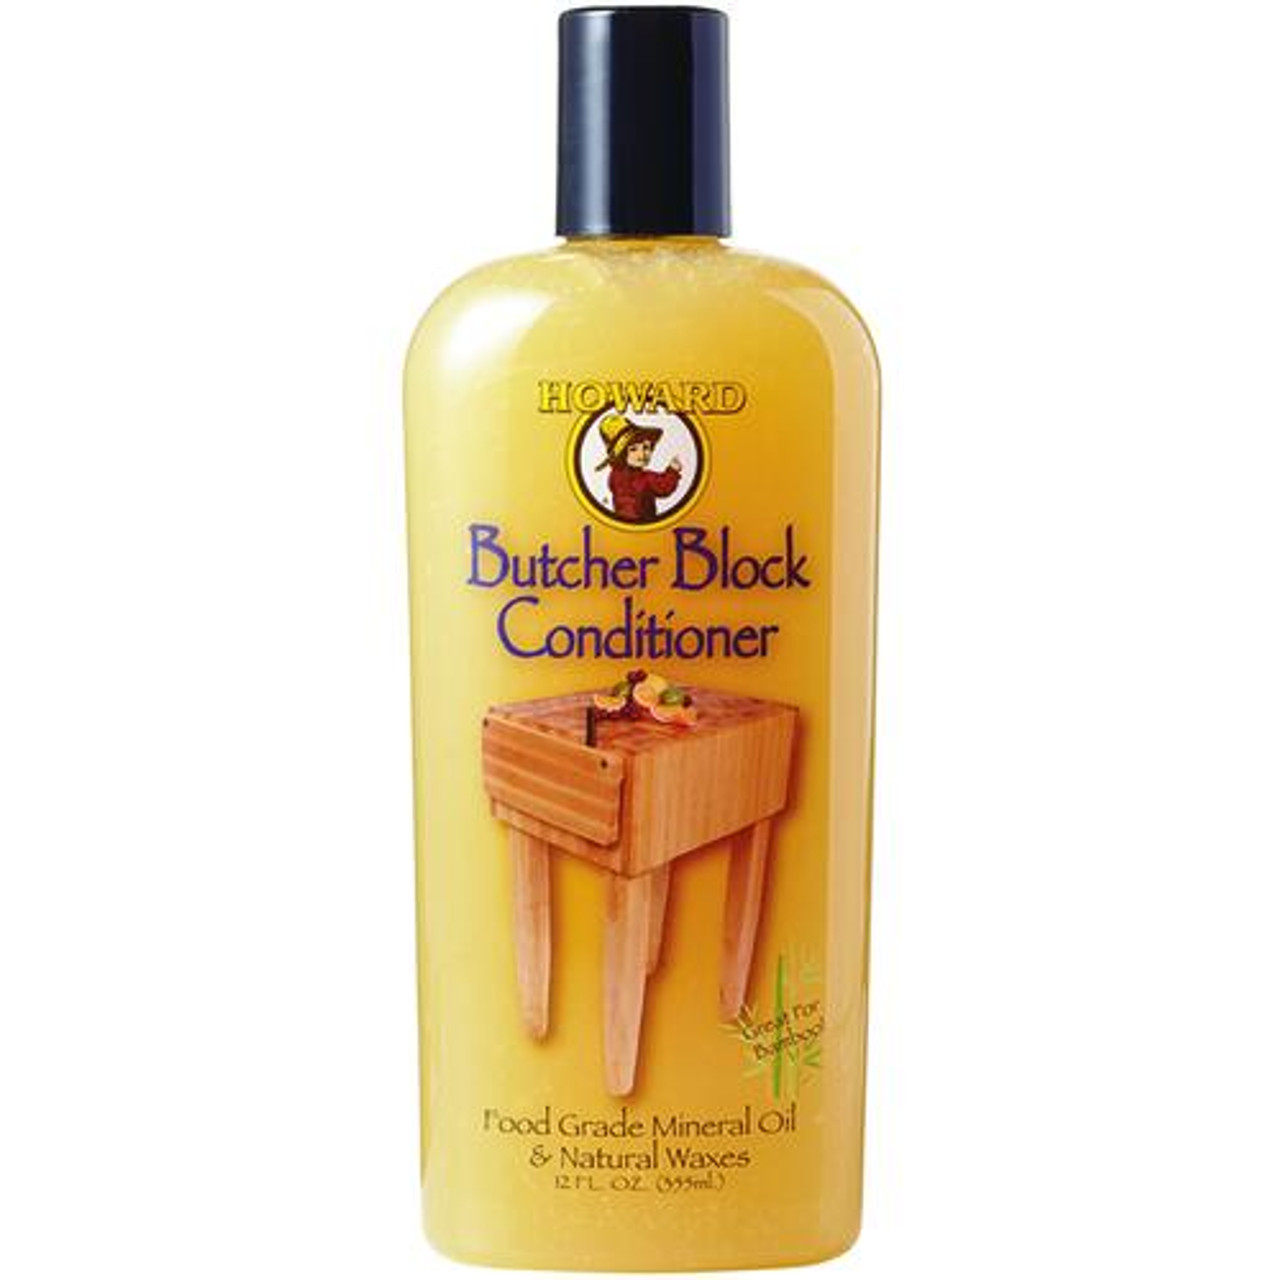 Butcher Block Conditioner is a natural wax with food grade mineral oil.